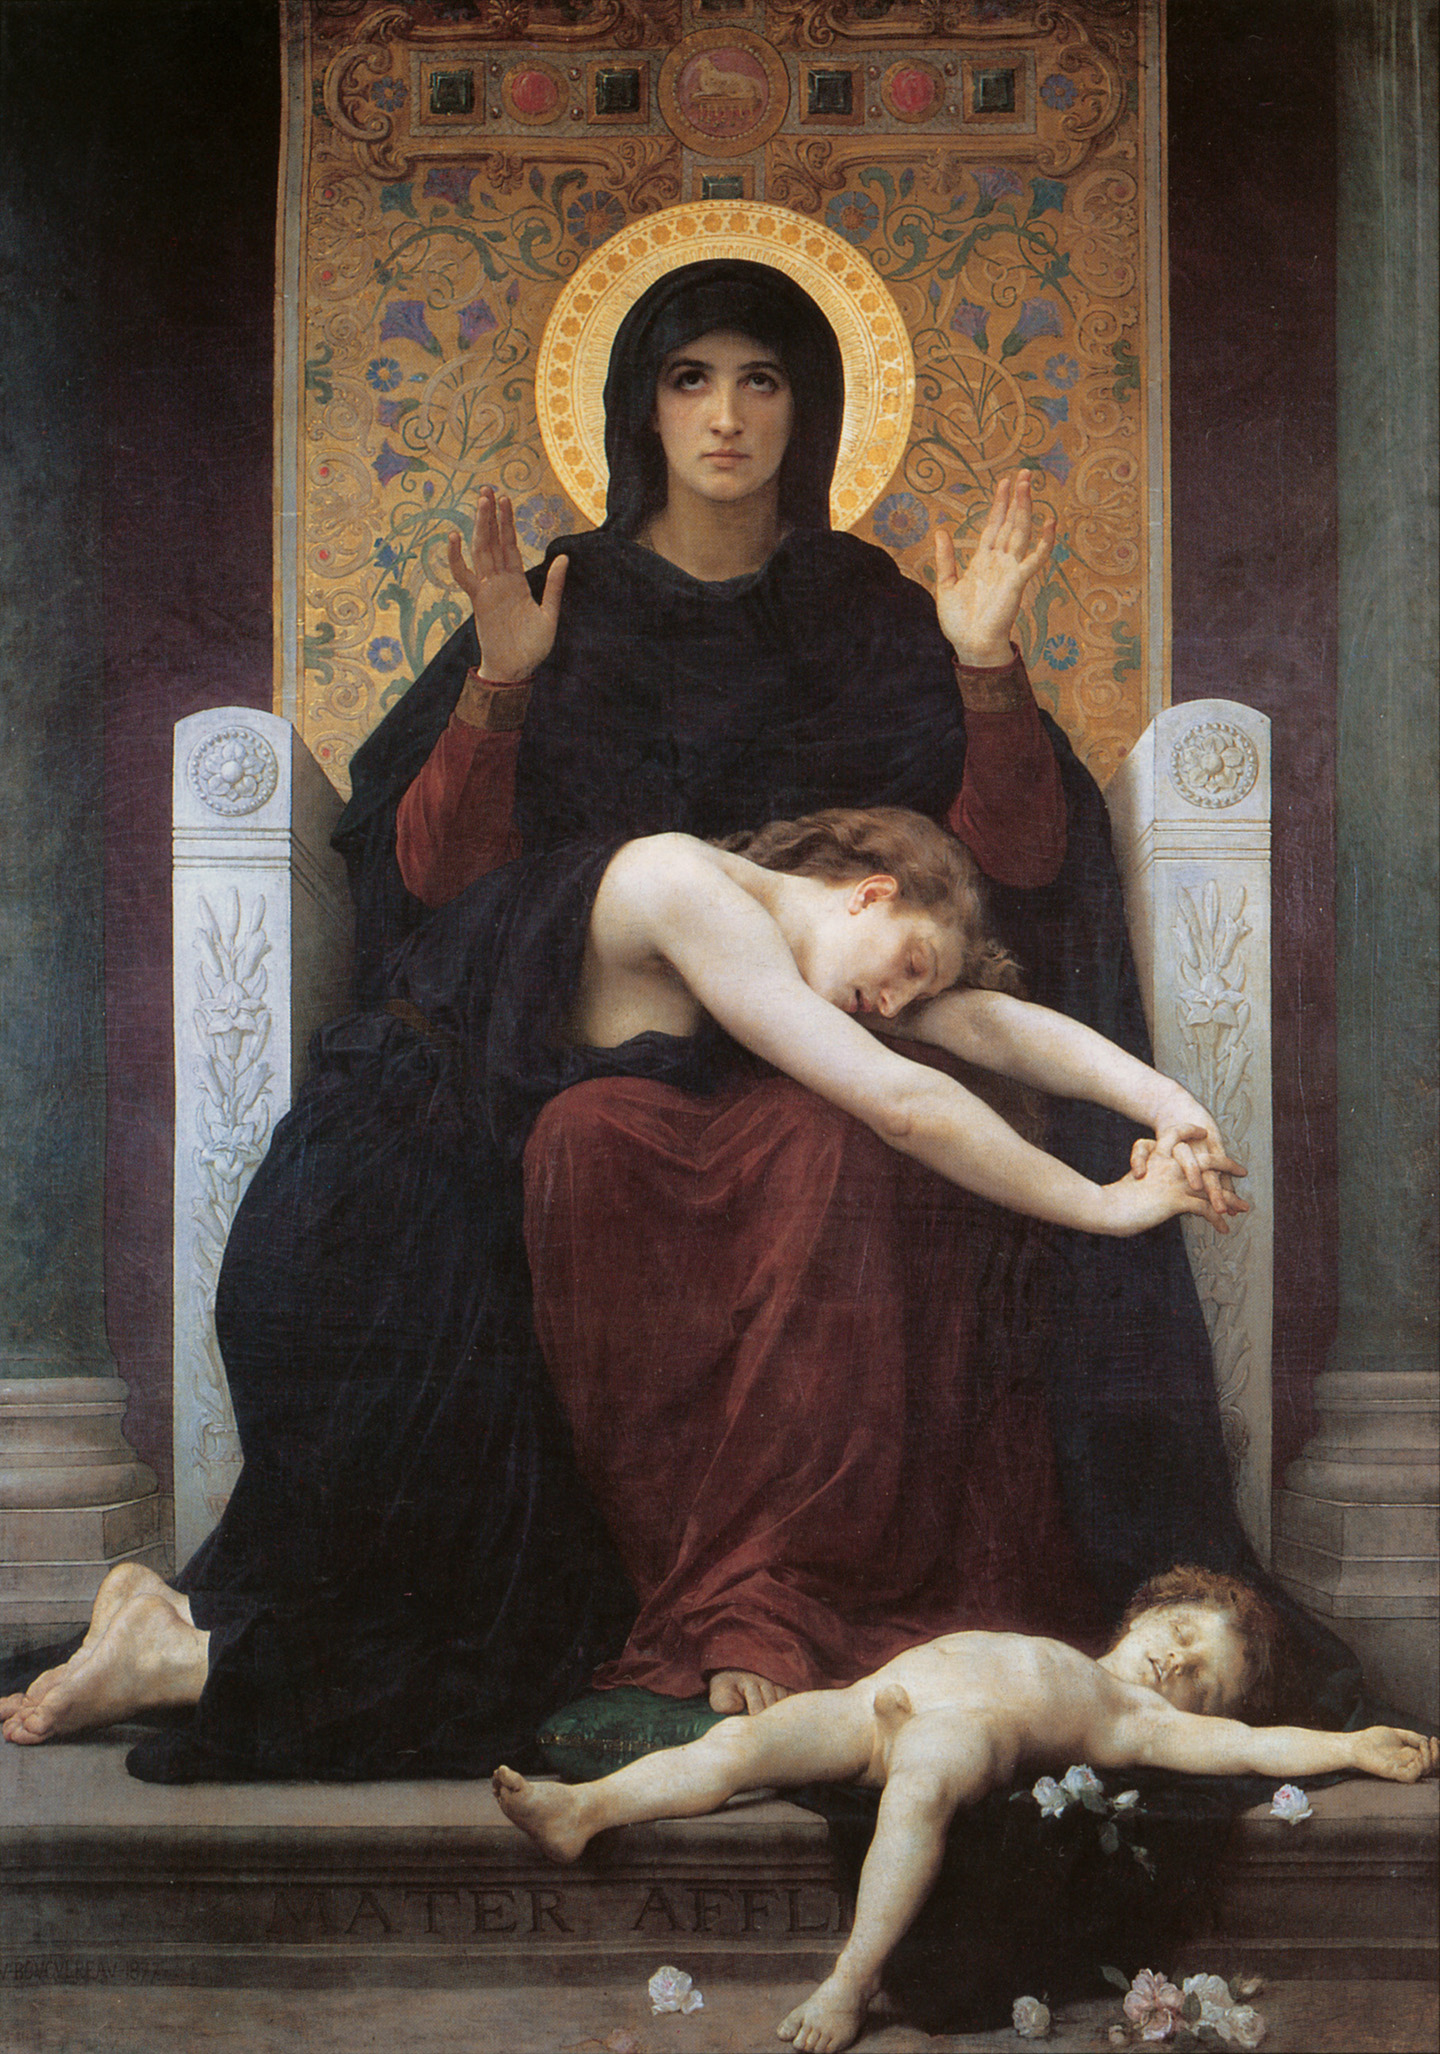 "The Virgin of Consolation" by Bouguereau